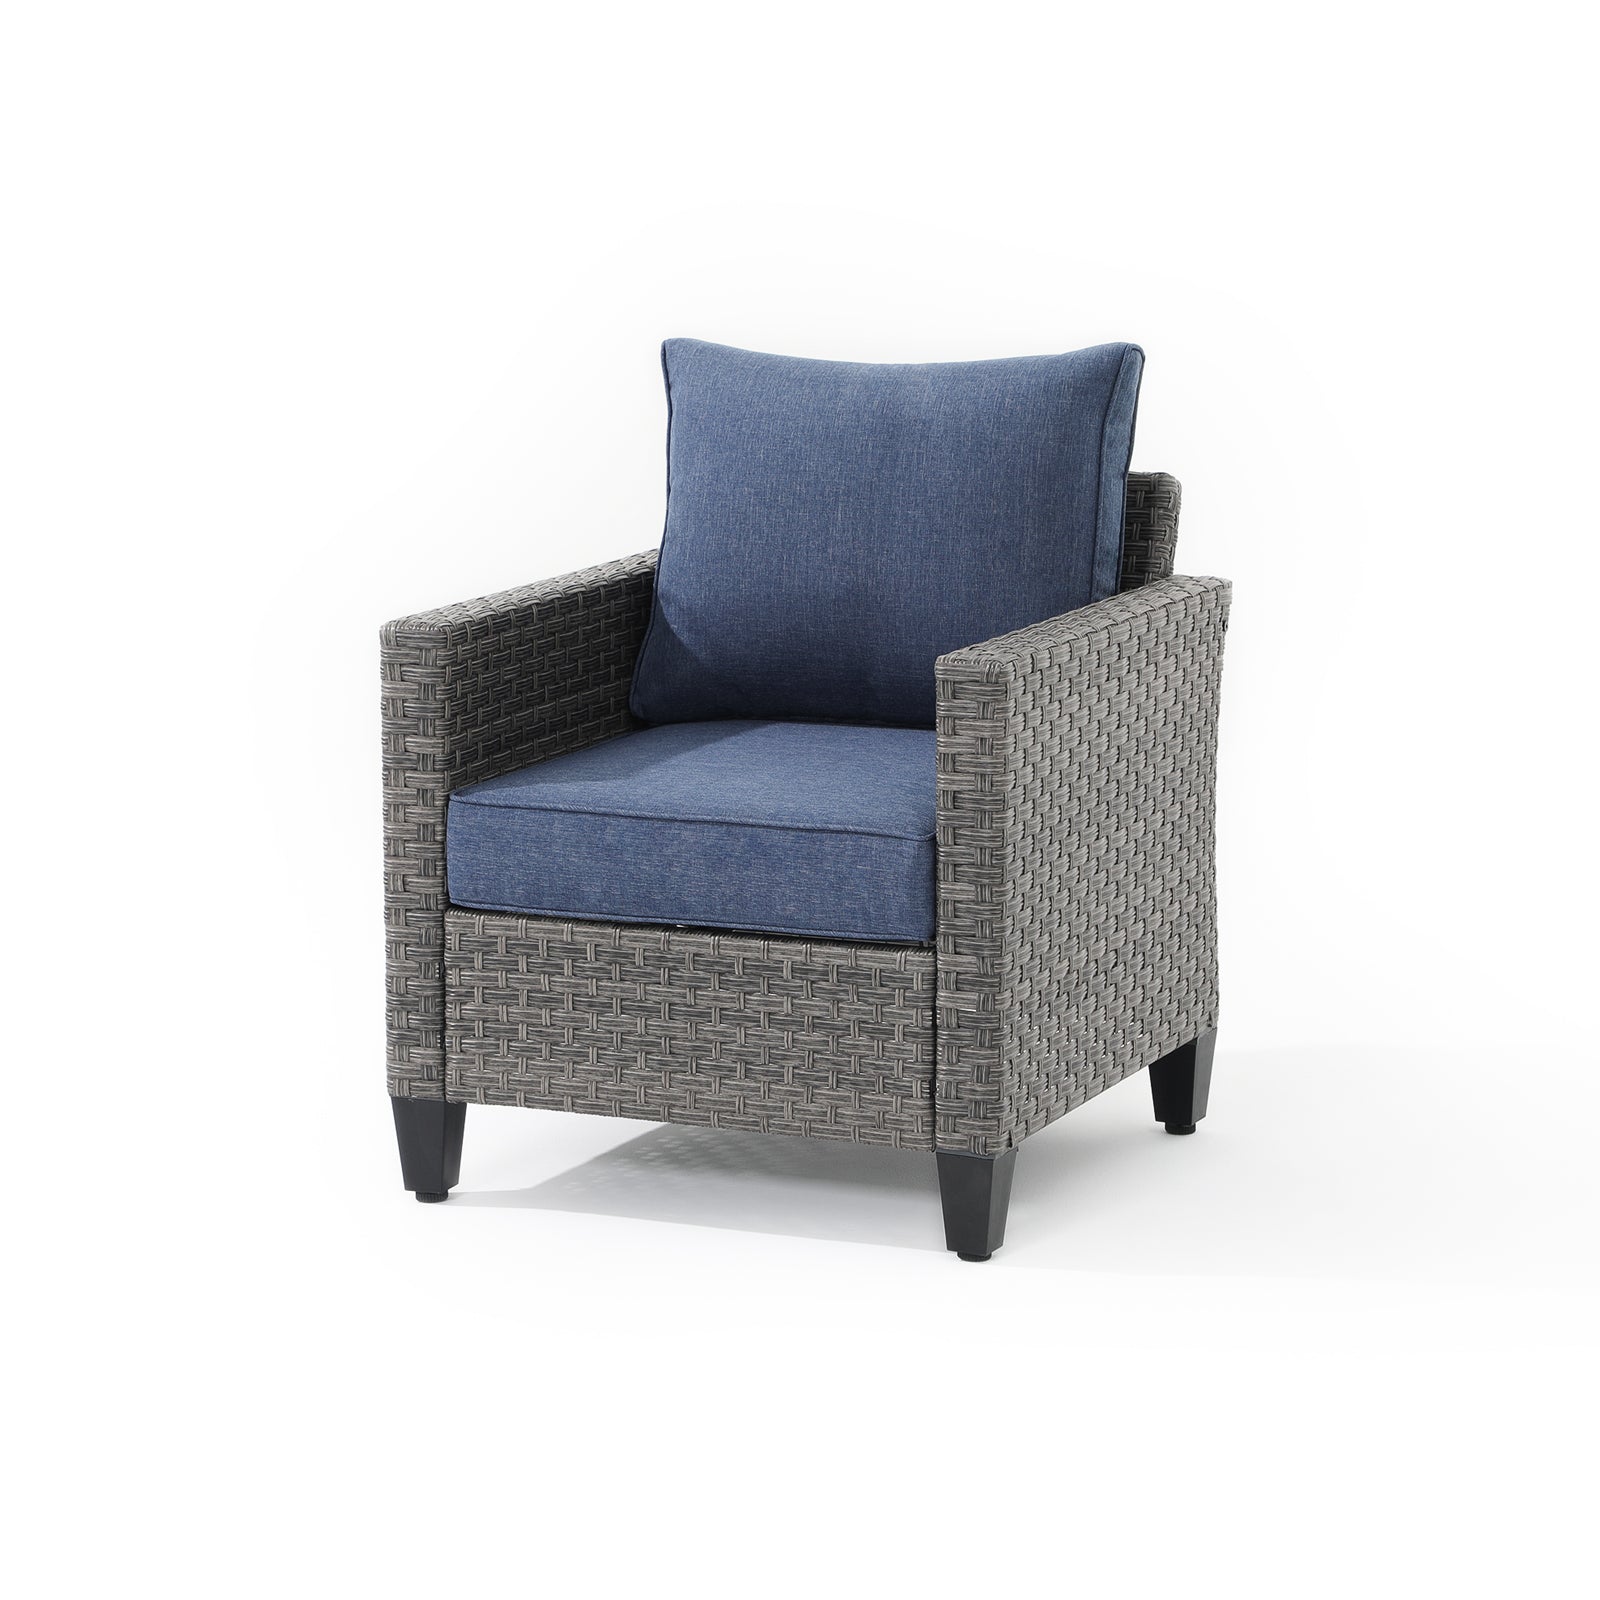 Ayia lounge chair with rattan design, navy blue cushions, left angle - Jardina Furniture #color_Navy blue